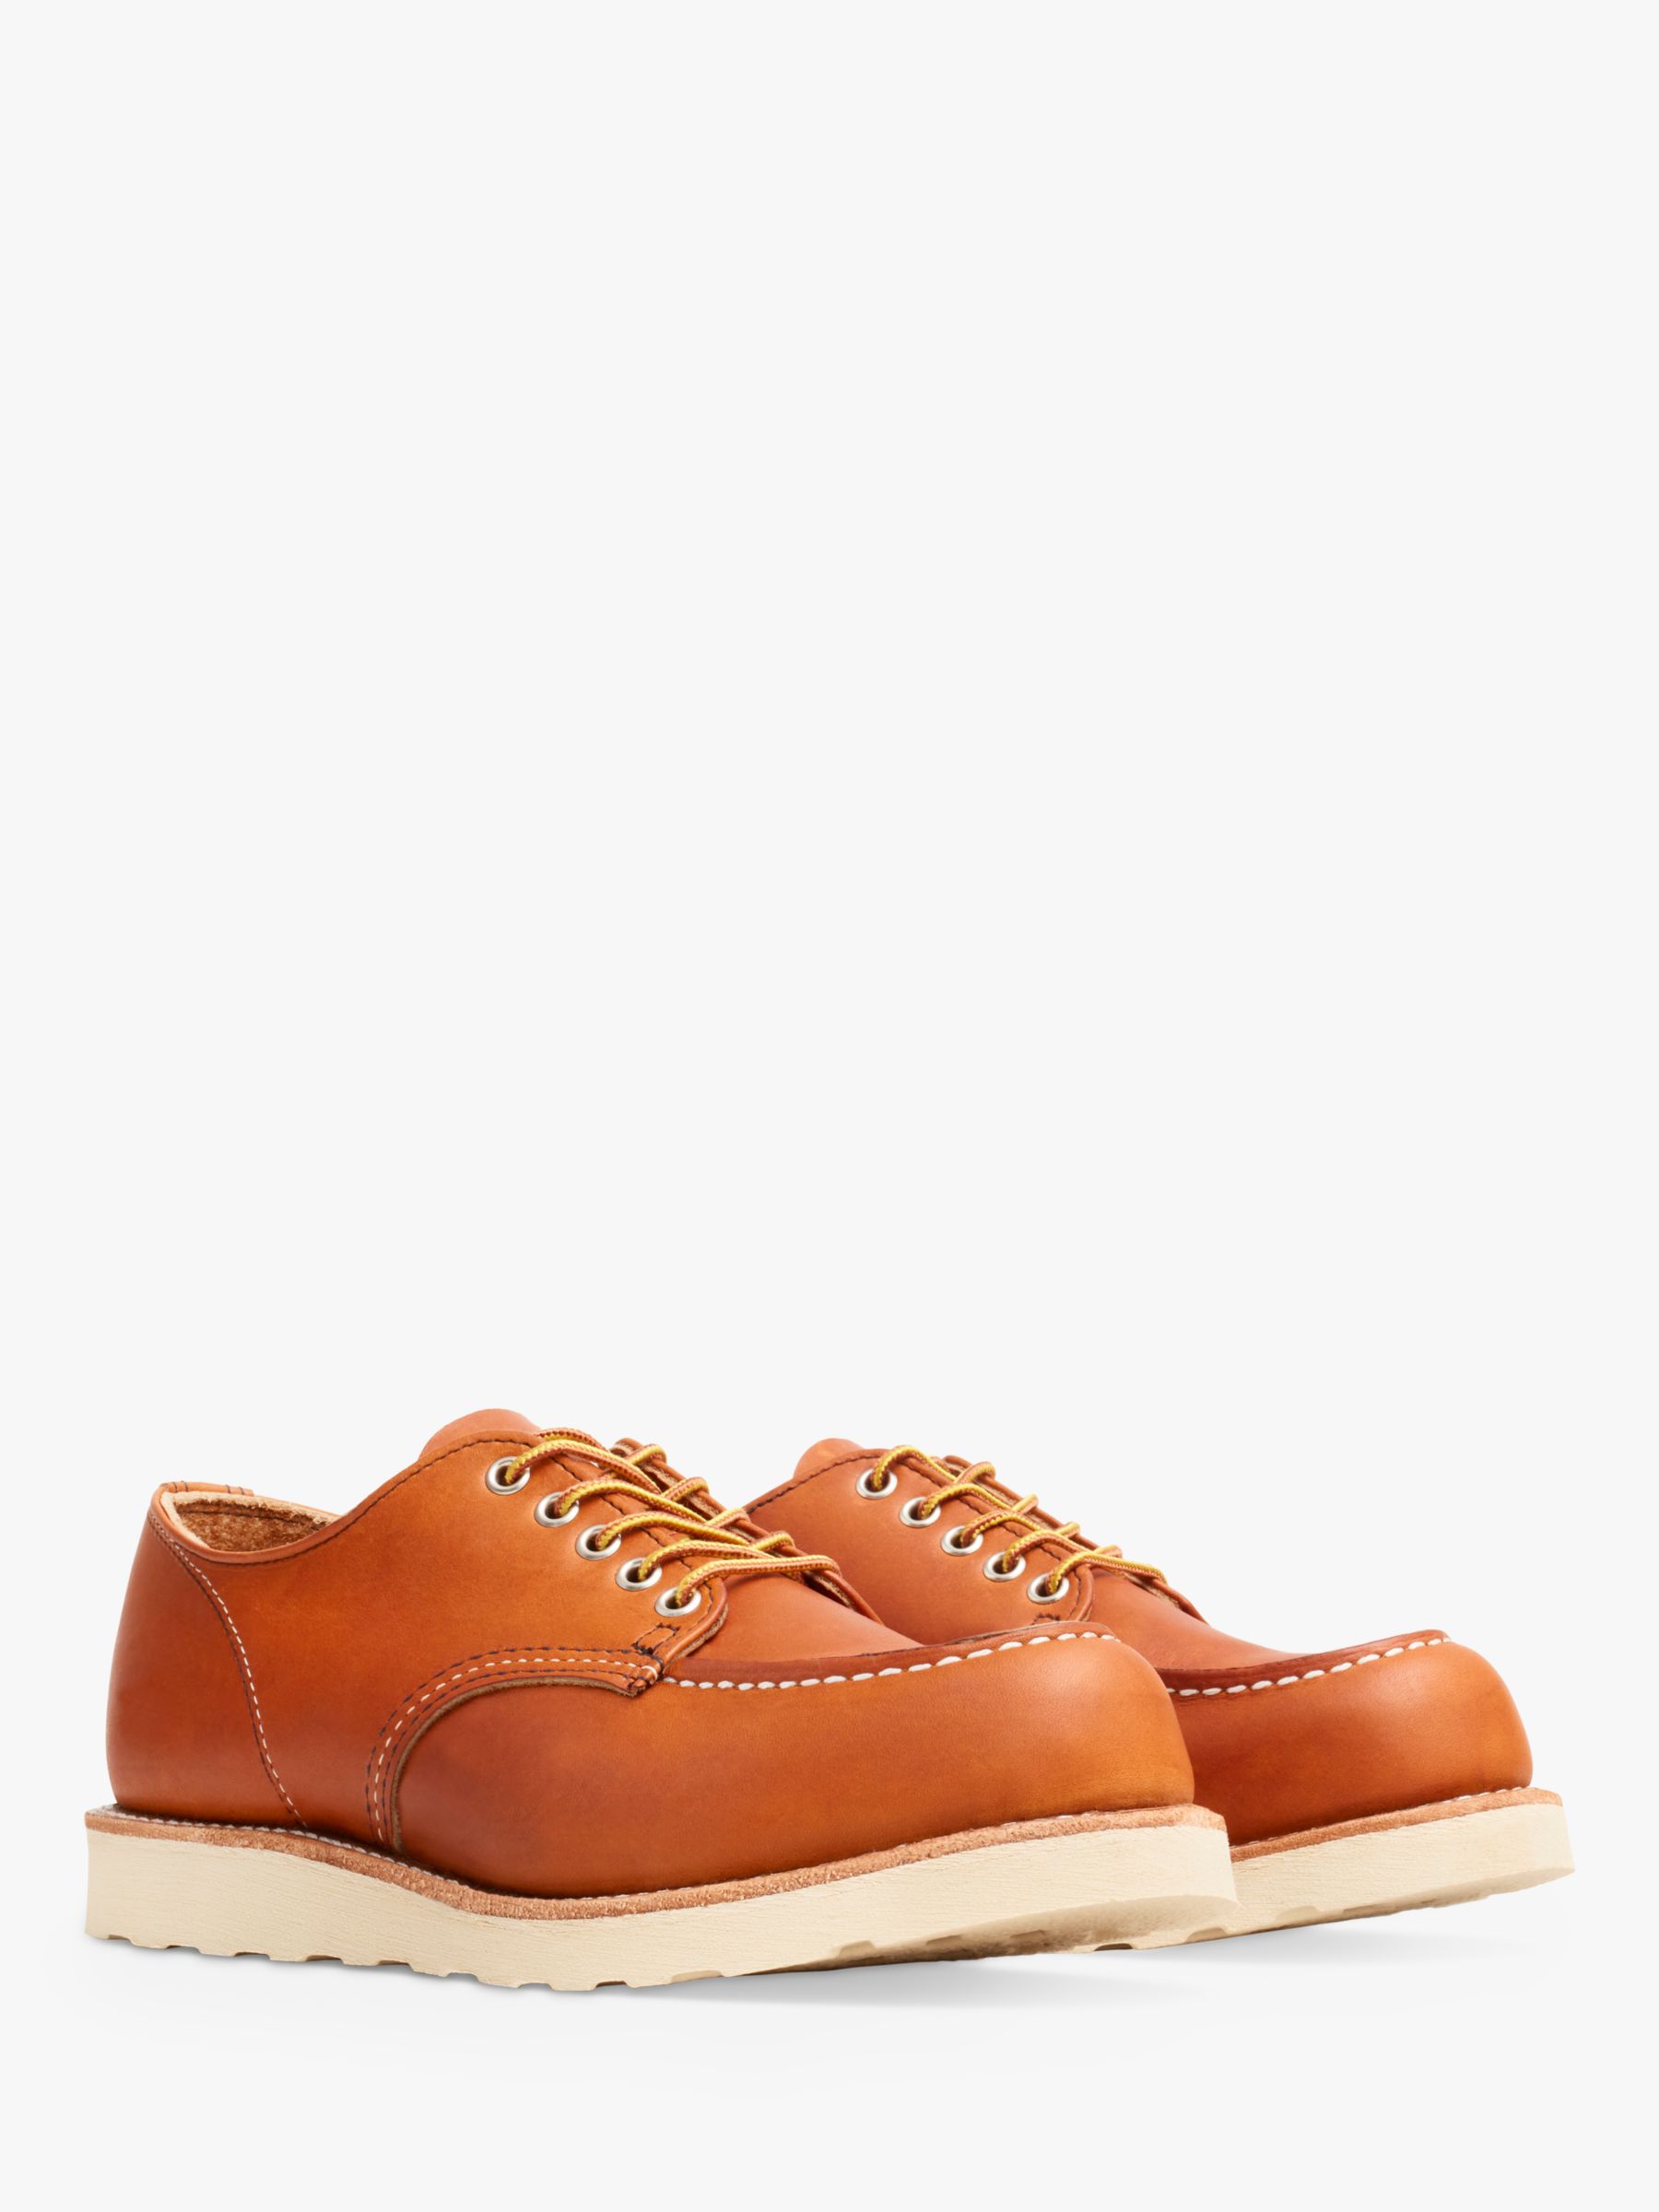 Red Wing Heritage Work Classic Oxford Shoe, Tan, 8